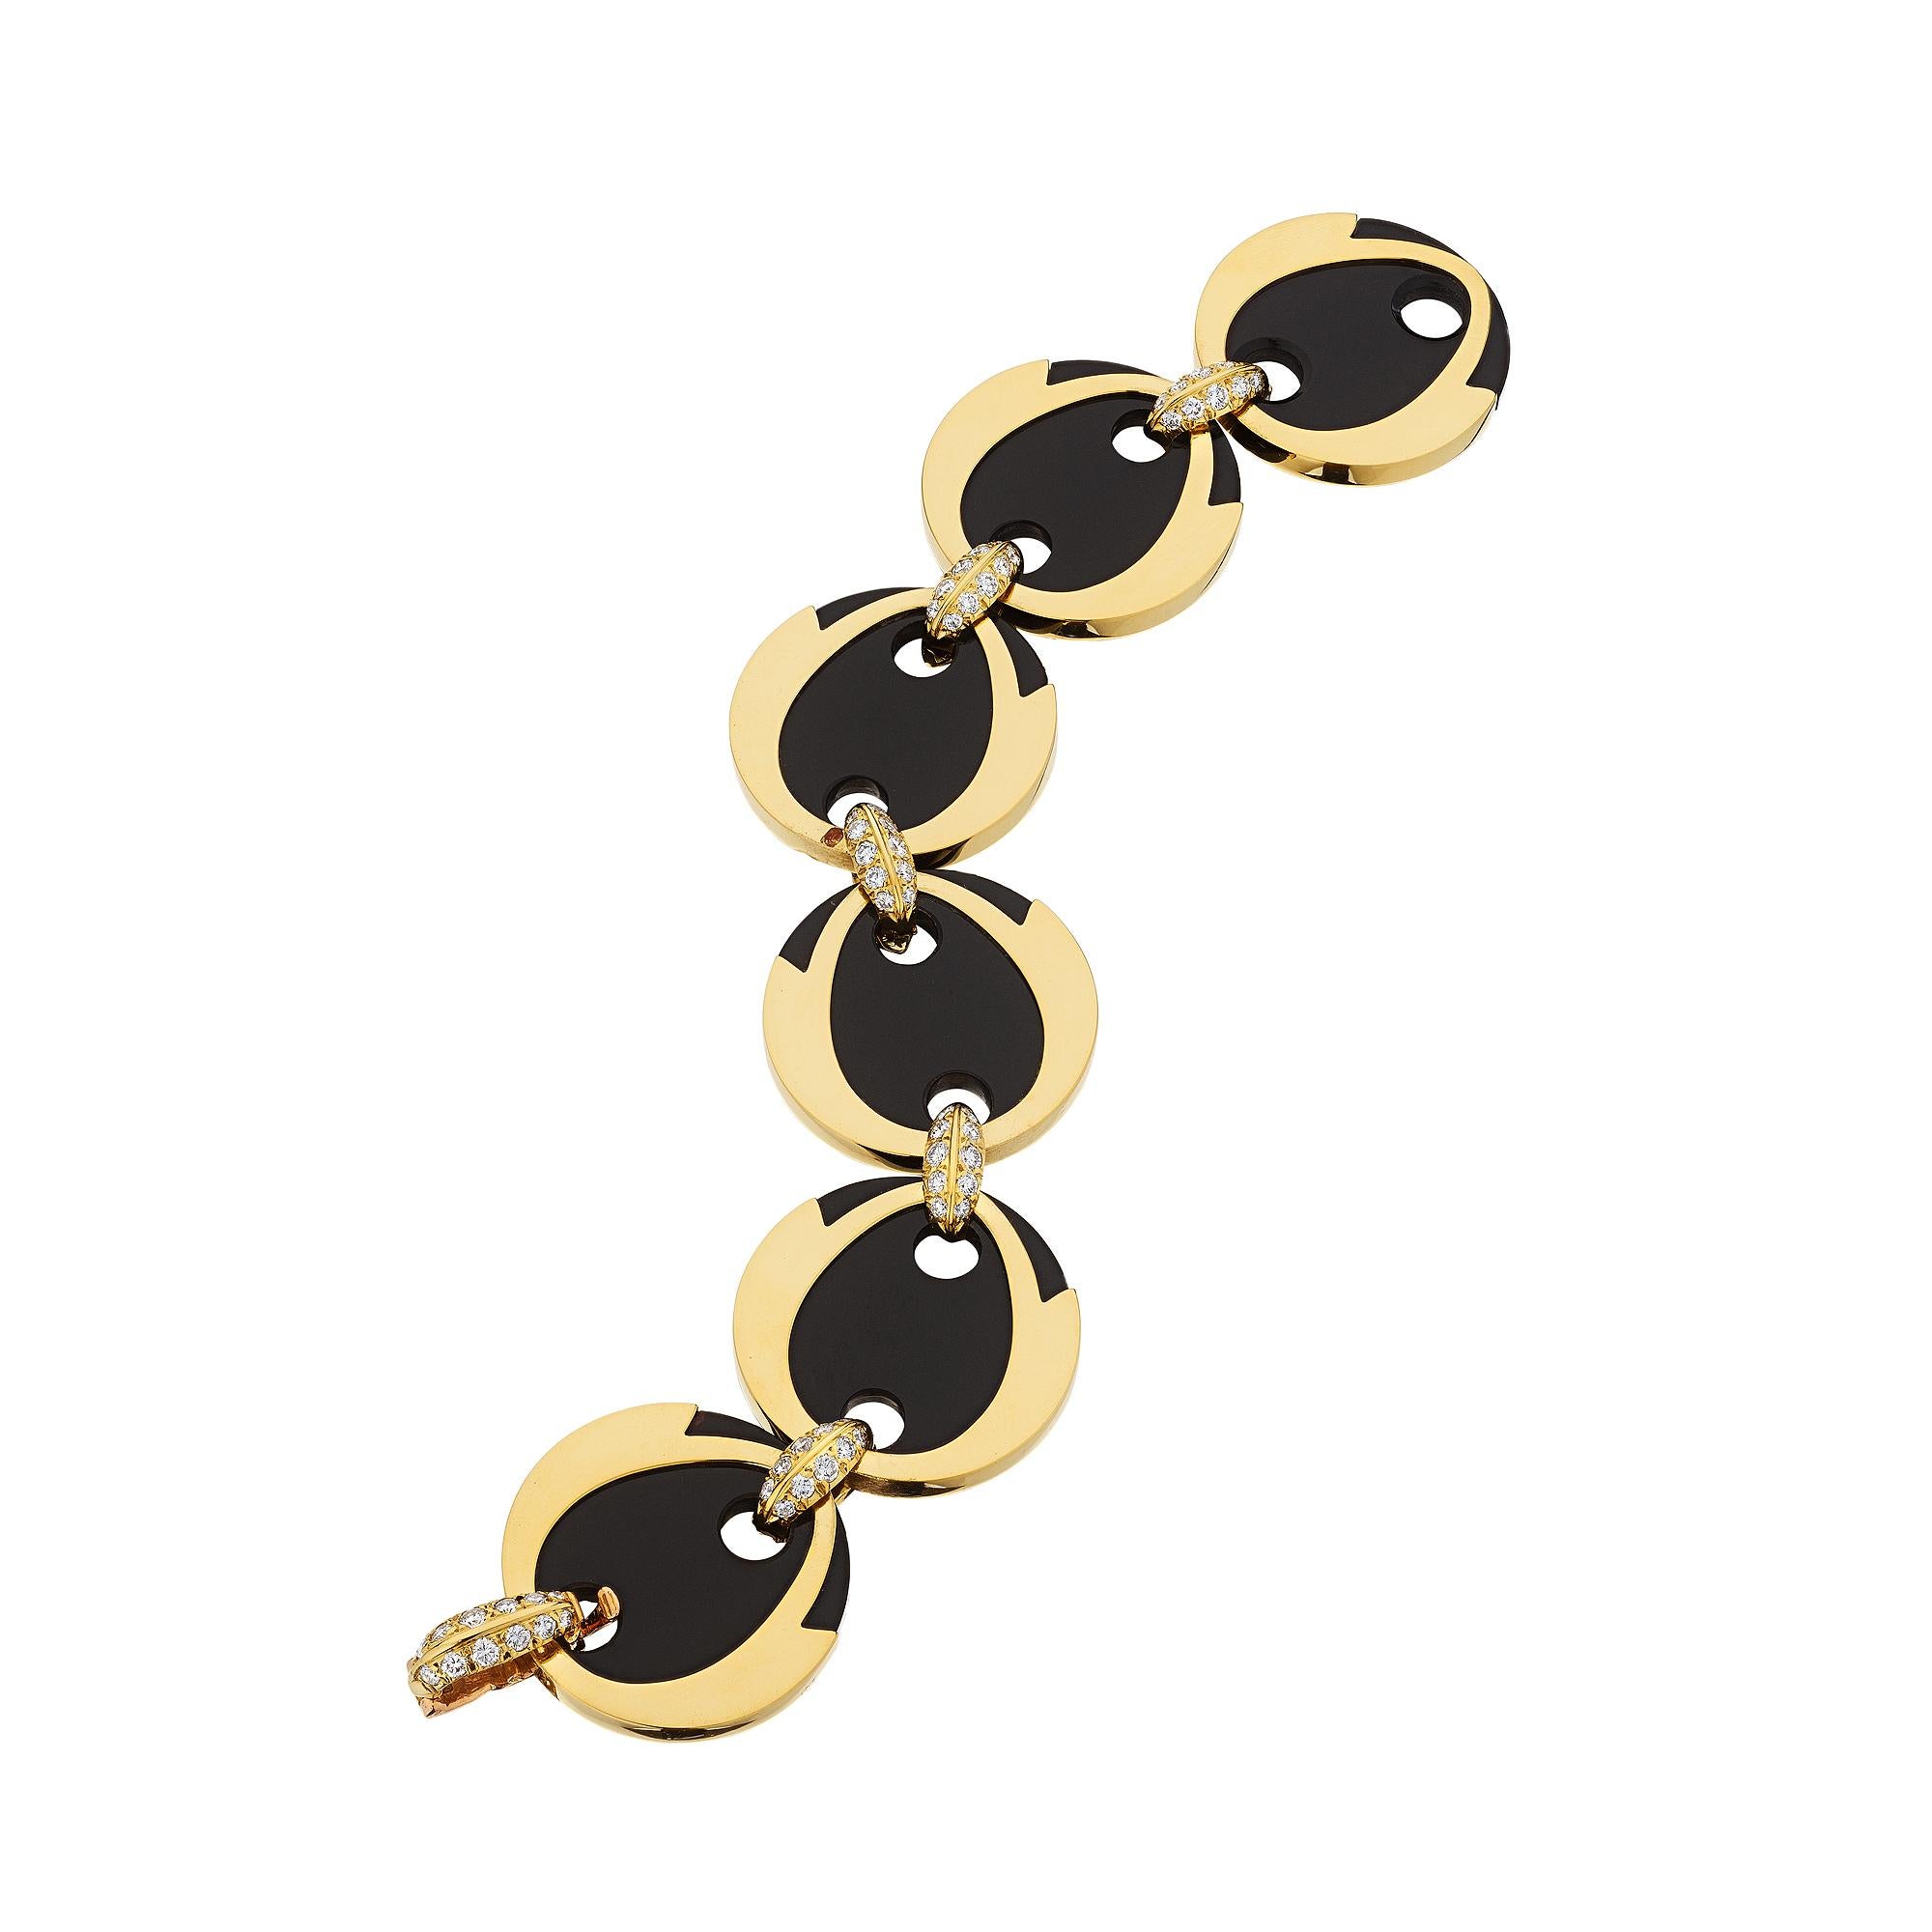 With lively lyrical lines, this Andre Vassort for Boucheron diamond, onyx, and 18 karat yellow gold modernist link bracelet is mesmerizing.  Five round onyx discs stylishly framed in gold and linked with sizzling round cut diamonds, combine to make